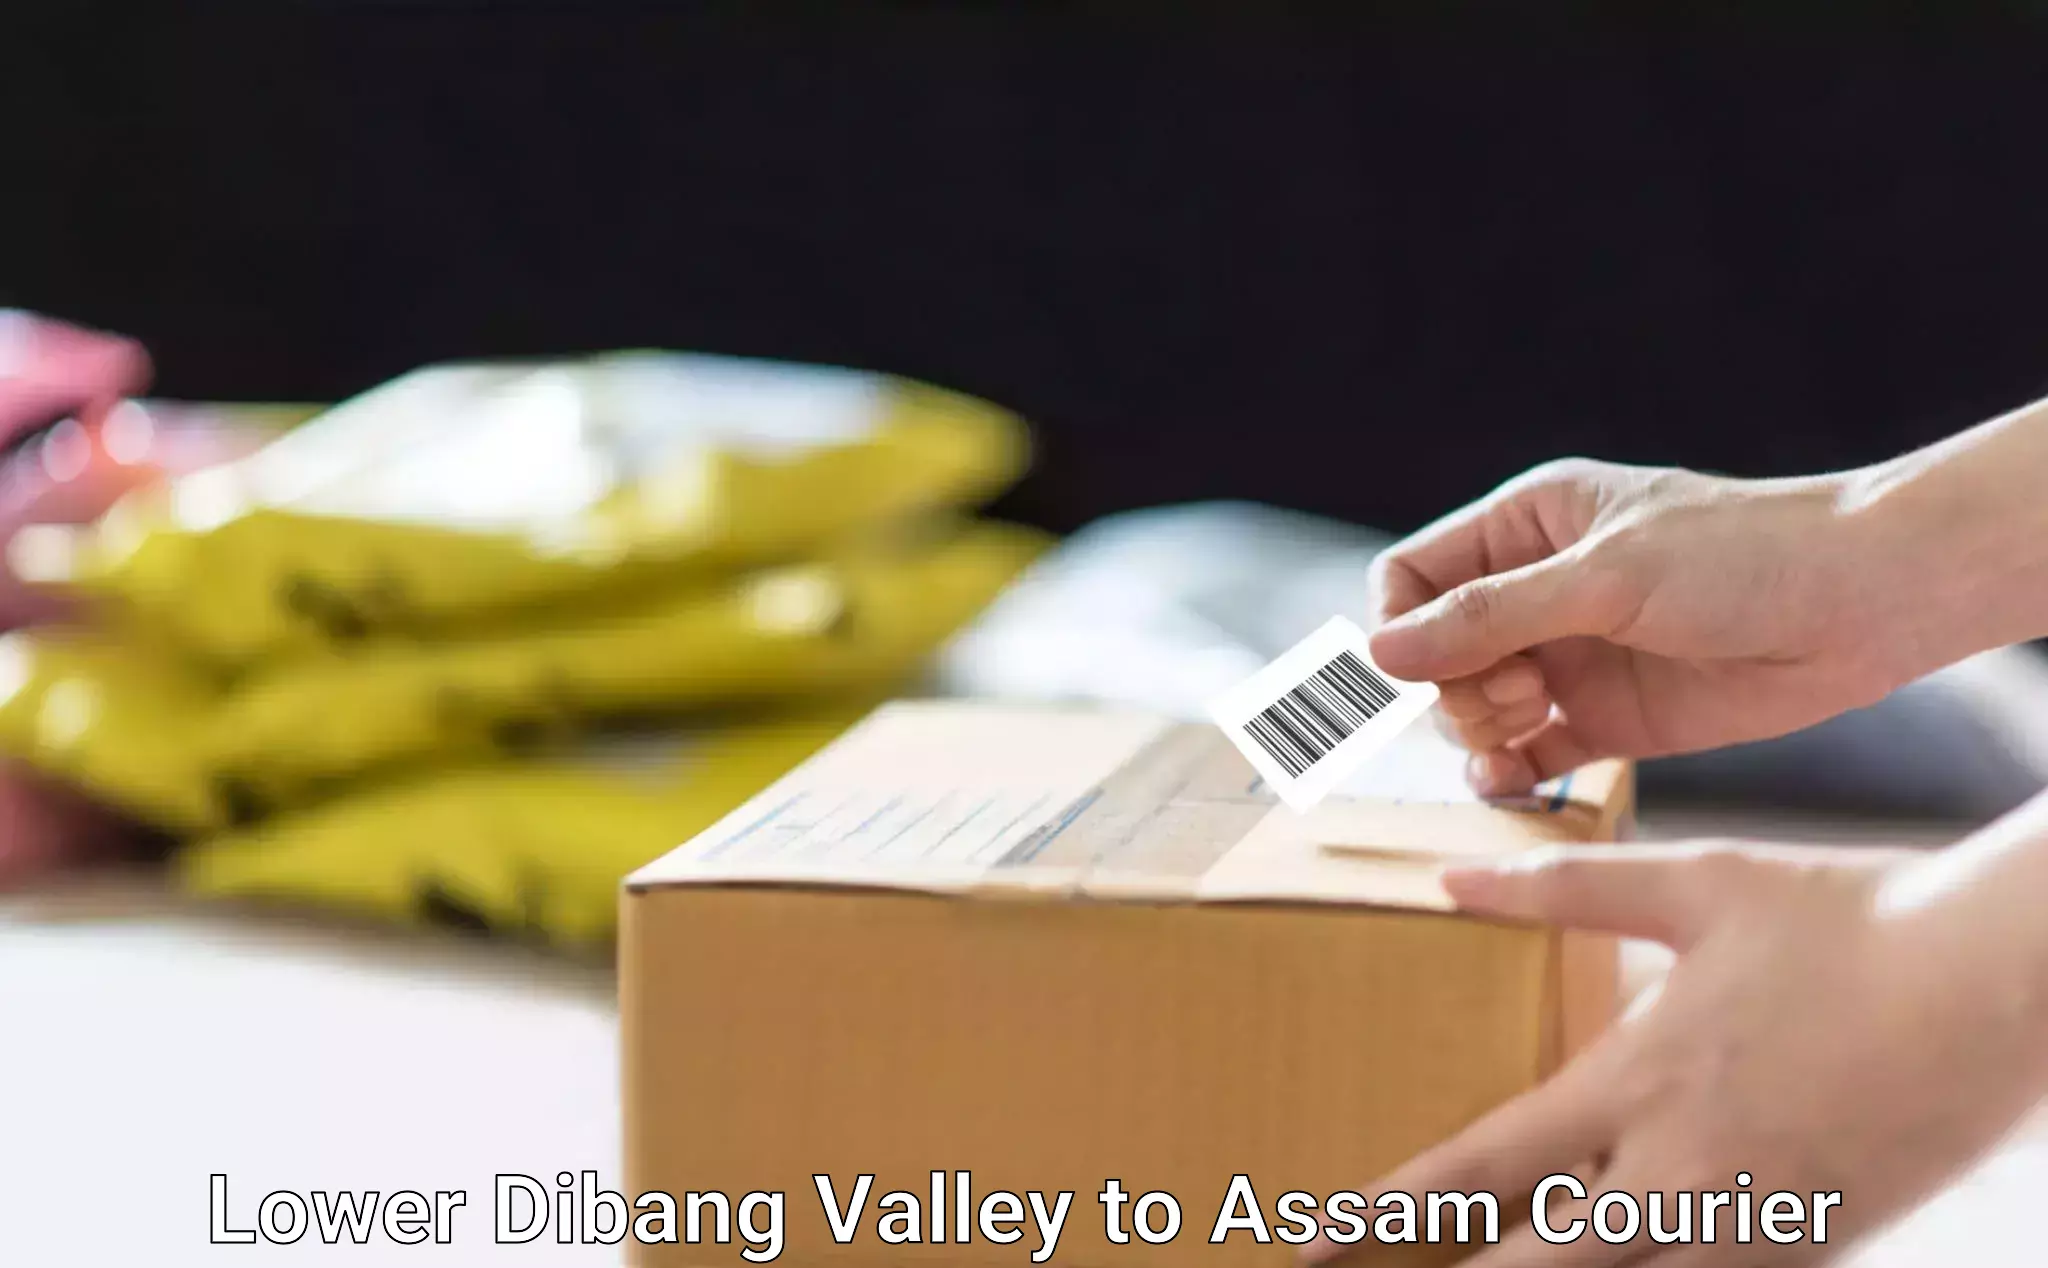 Ocean freight courier Lower Dibang Valley to Lala Assam